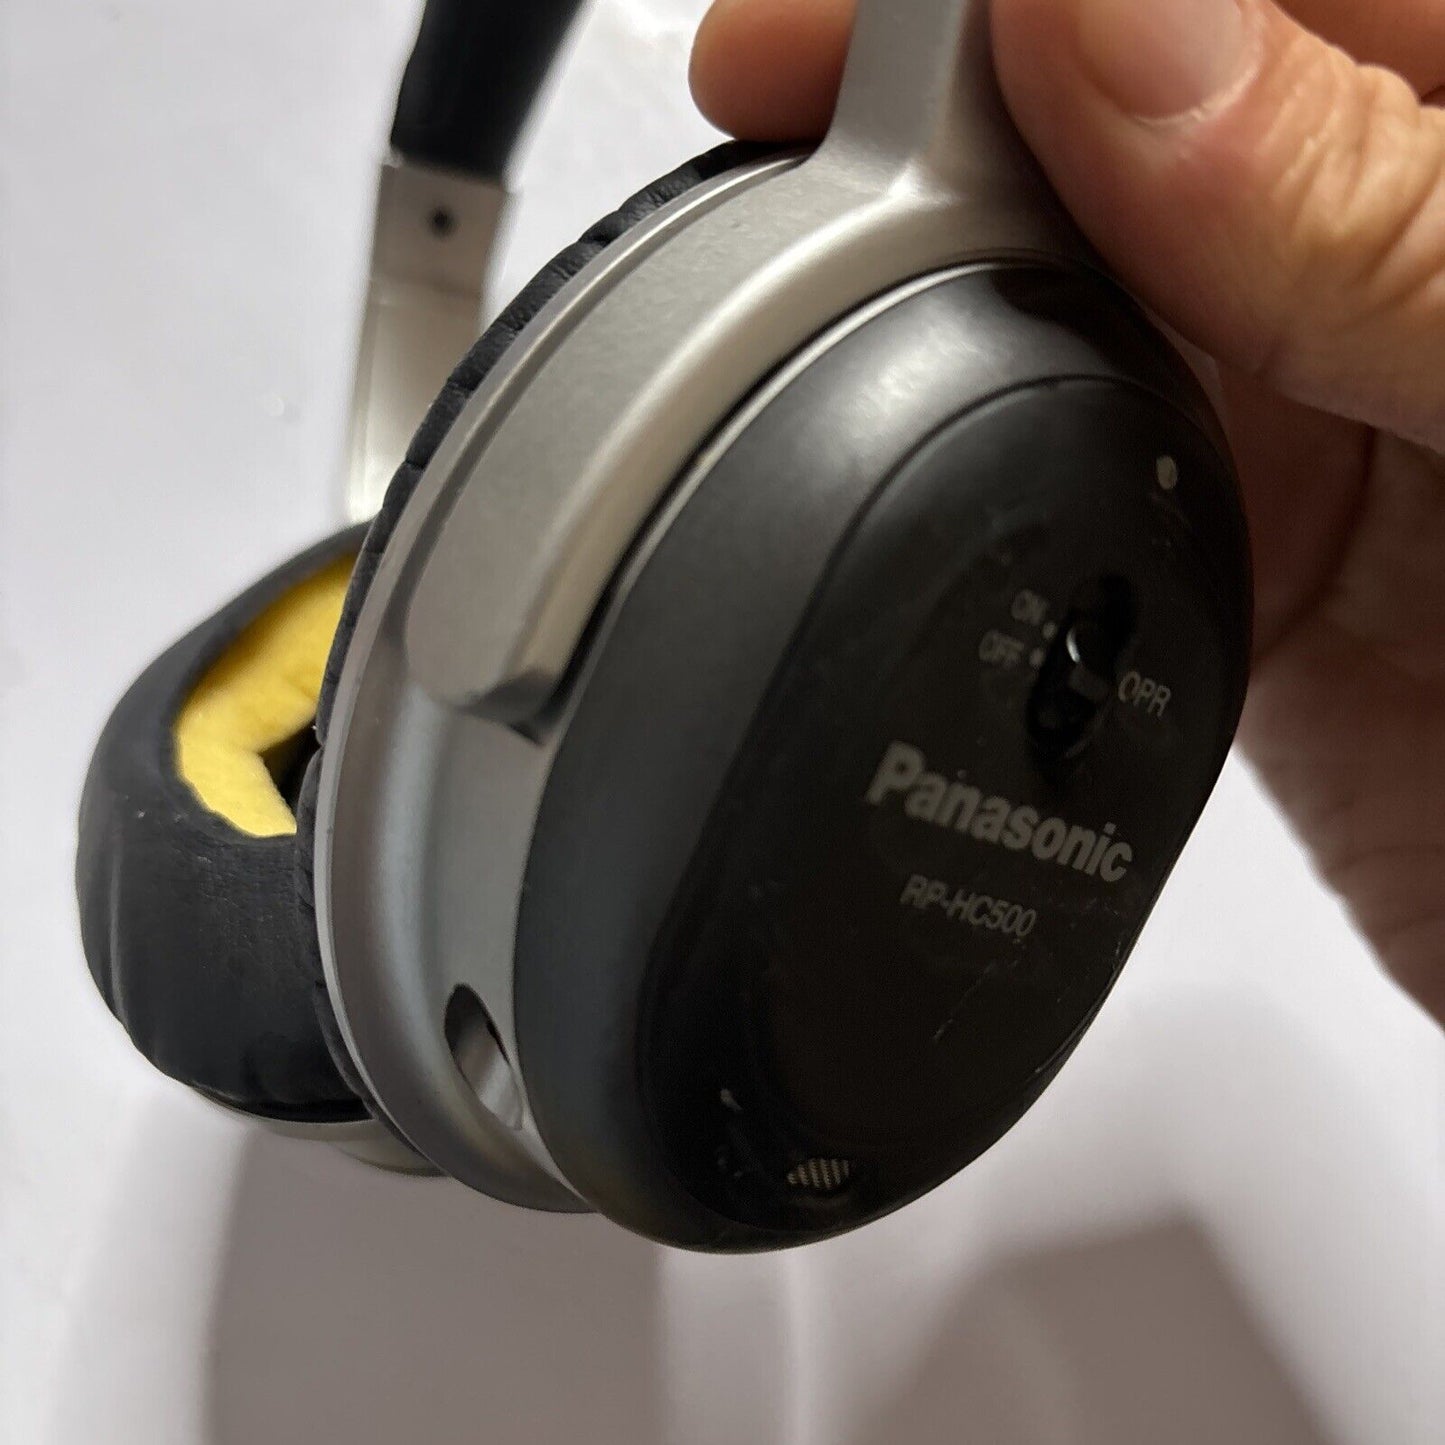 Panasonic RP-HC500 Wired Noise Cancelling Headphones 3.5mm